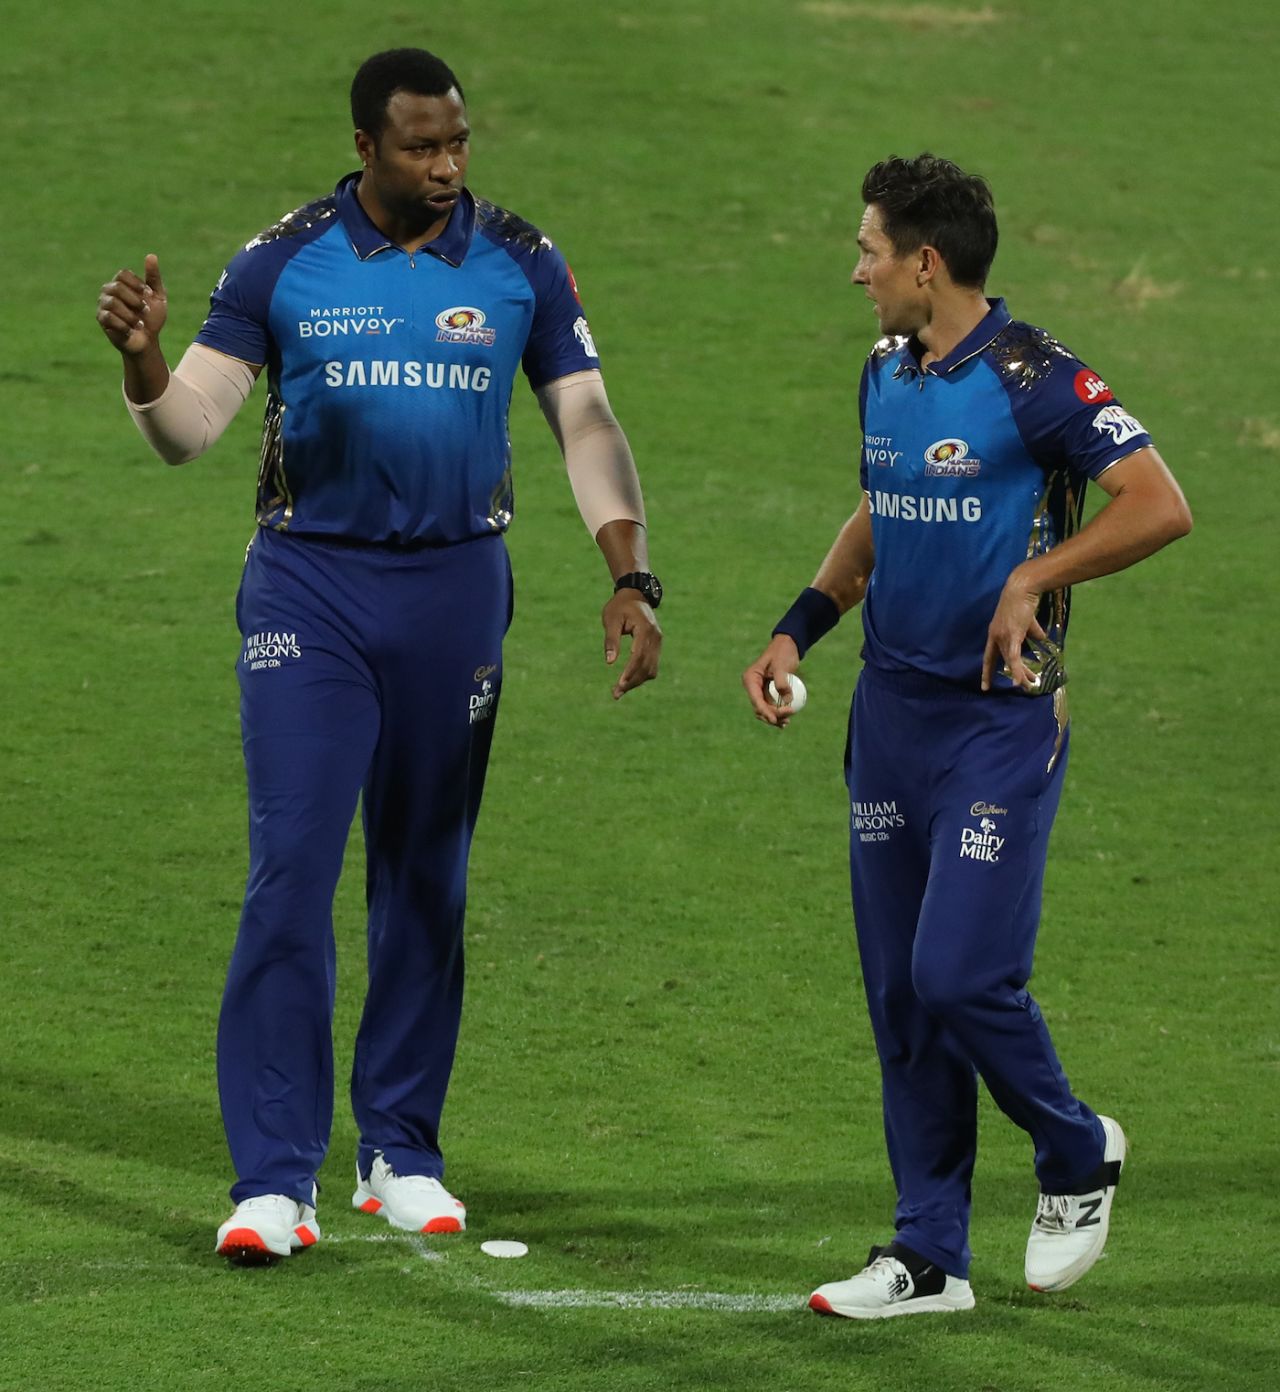 Kieron Pollard and Trent Boult have a chat during Mumbai Indians' match against Chennai Super Kings, Sharjah, October 23, 2020